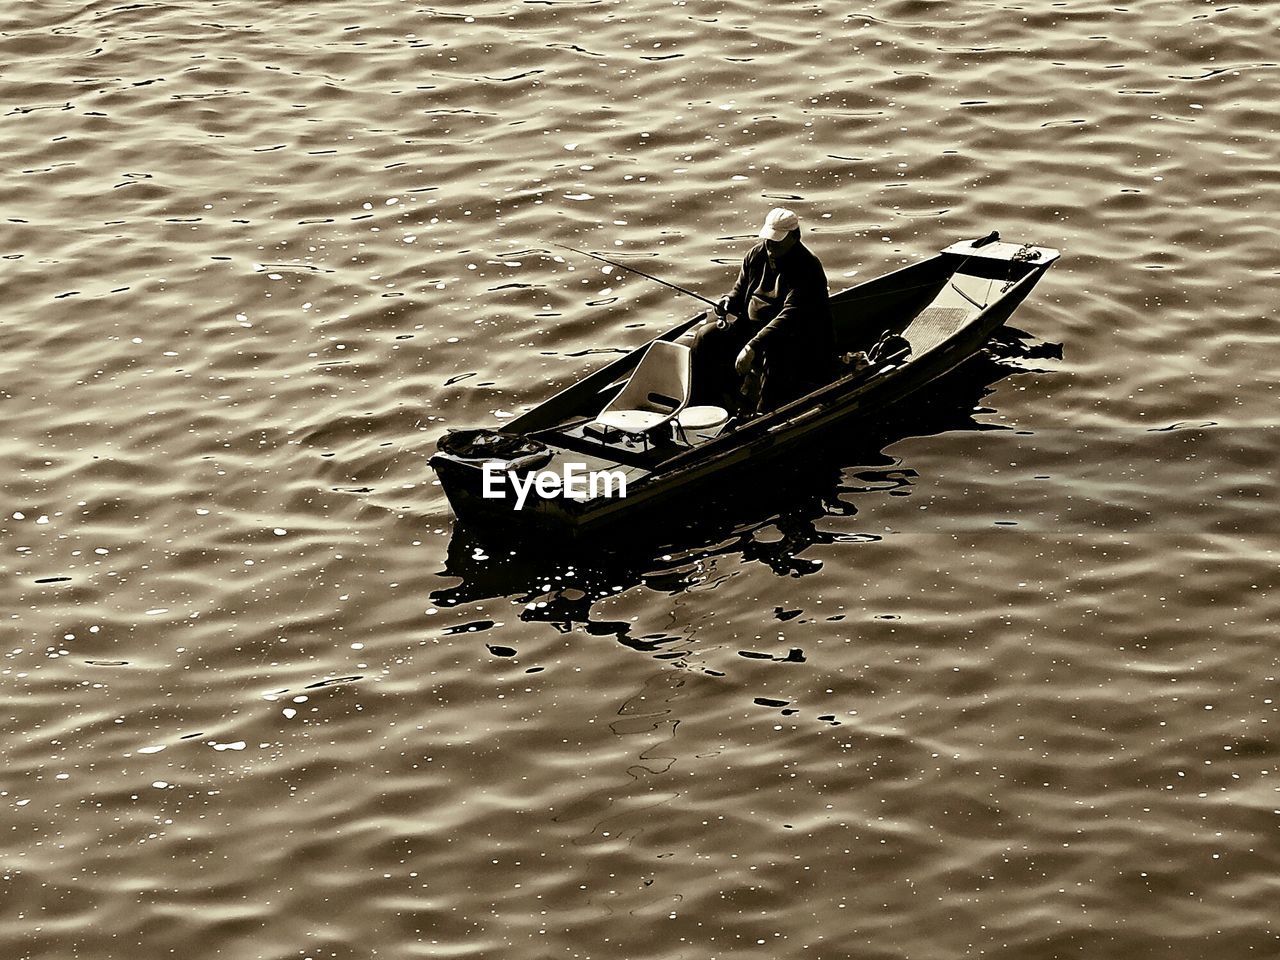 High angle view of man on boat fishing in sea